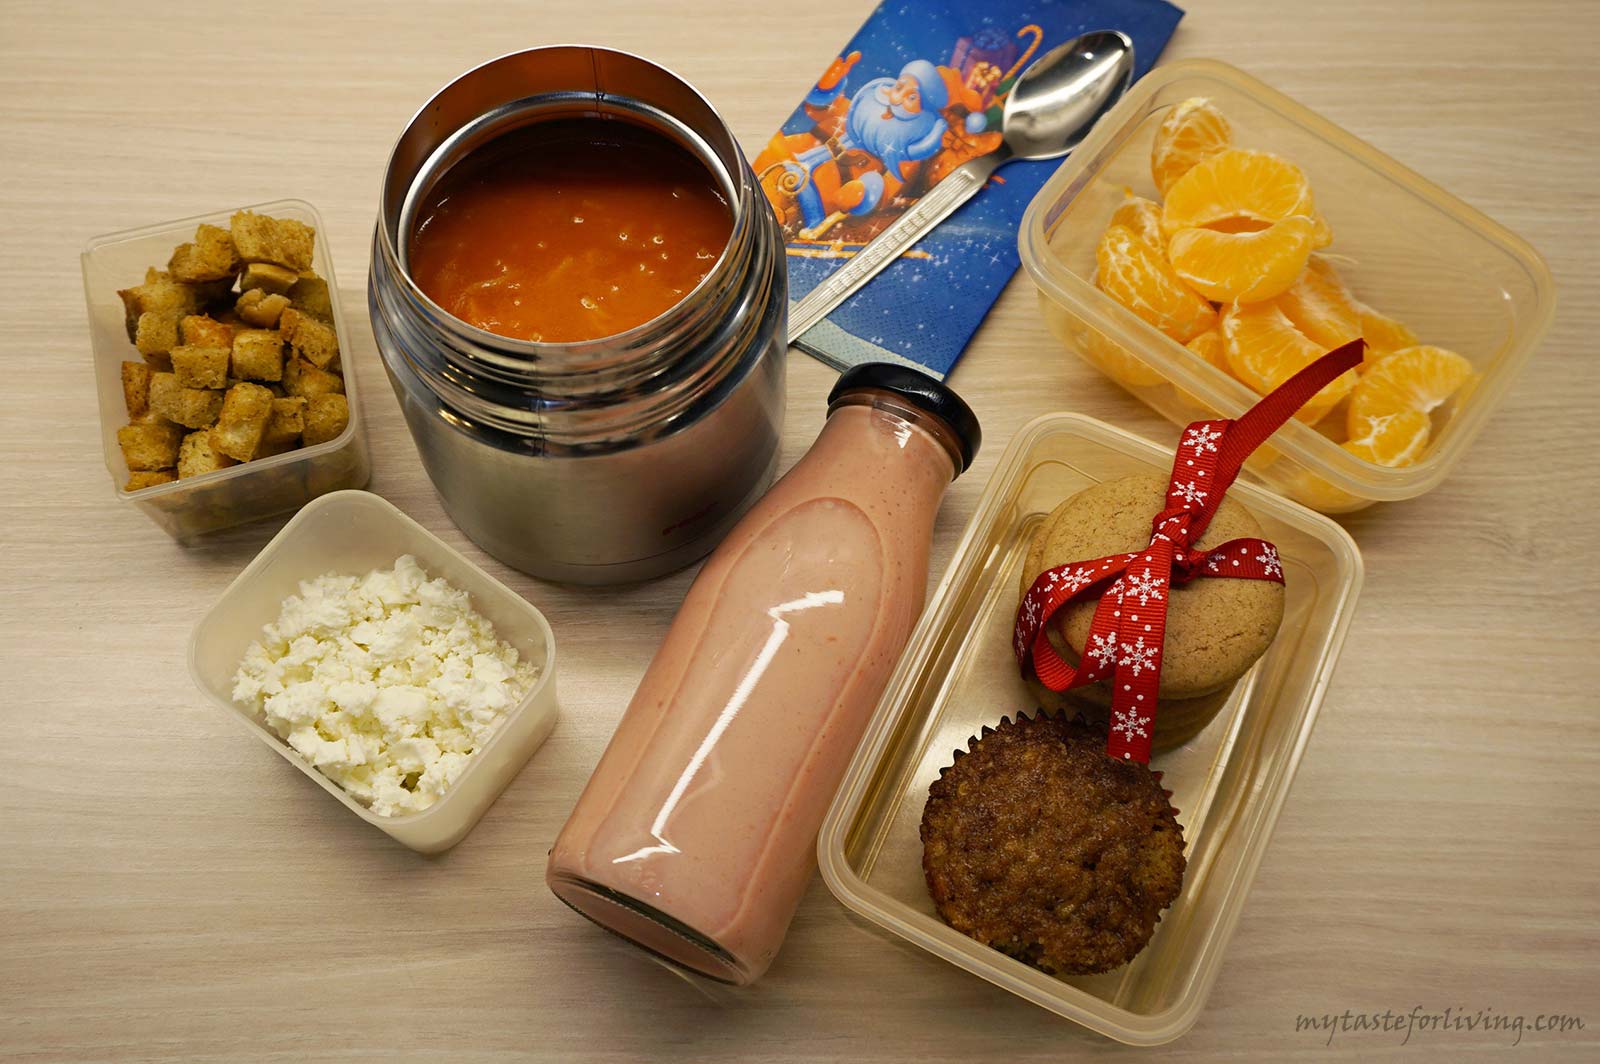 In the series "5 Ideas for homemade food for school" I share the lunchboxes of food that I send to my son, who is currently in 2nd grade. This is a sample weekly menu with photos and a description of the contents of the lunchboxes. You can also find links to recipes that I have posted on the site. 